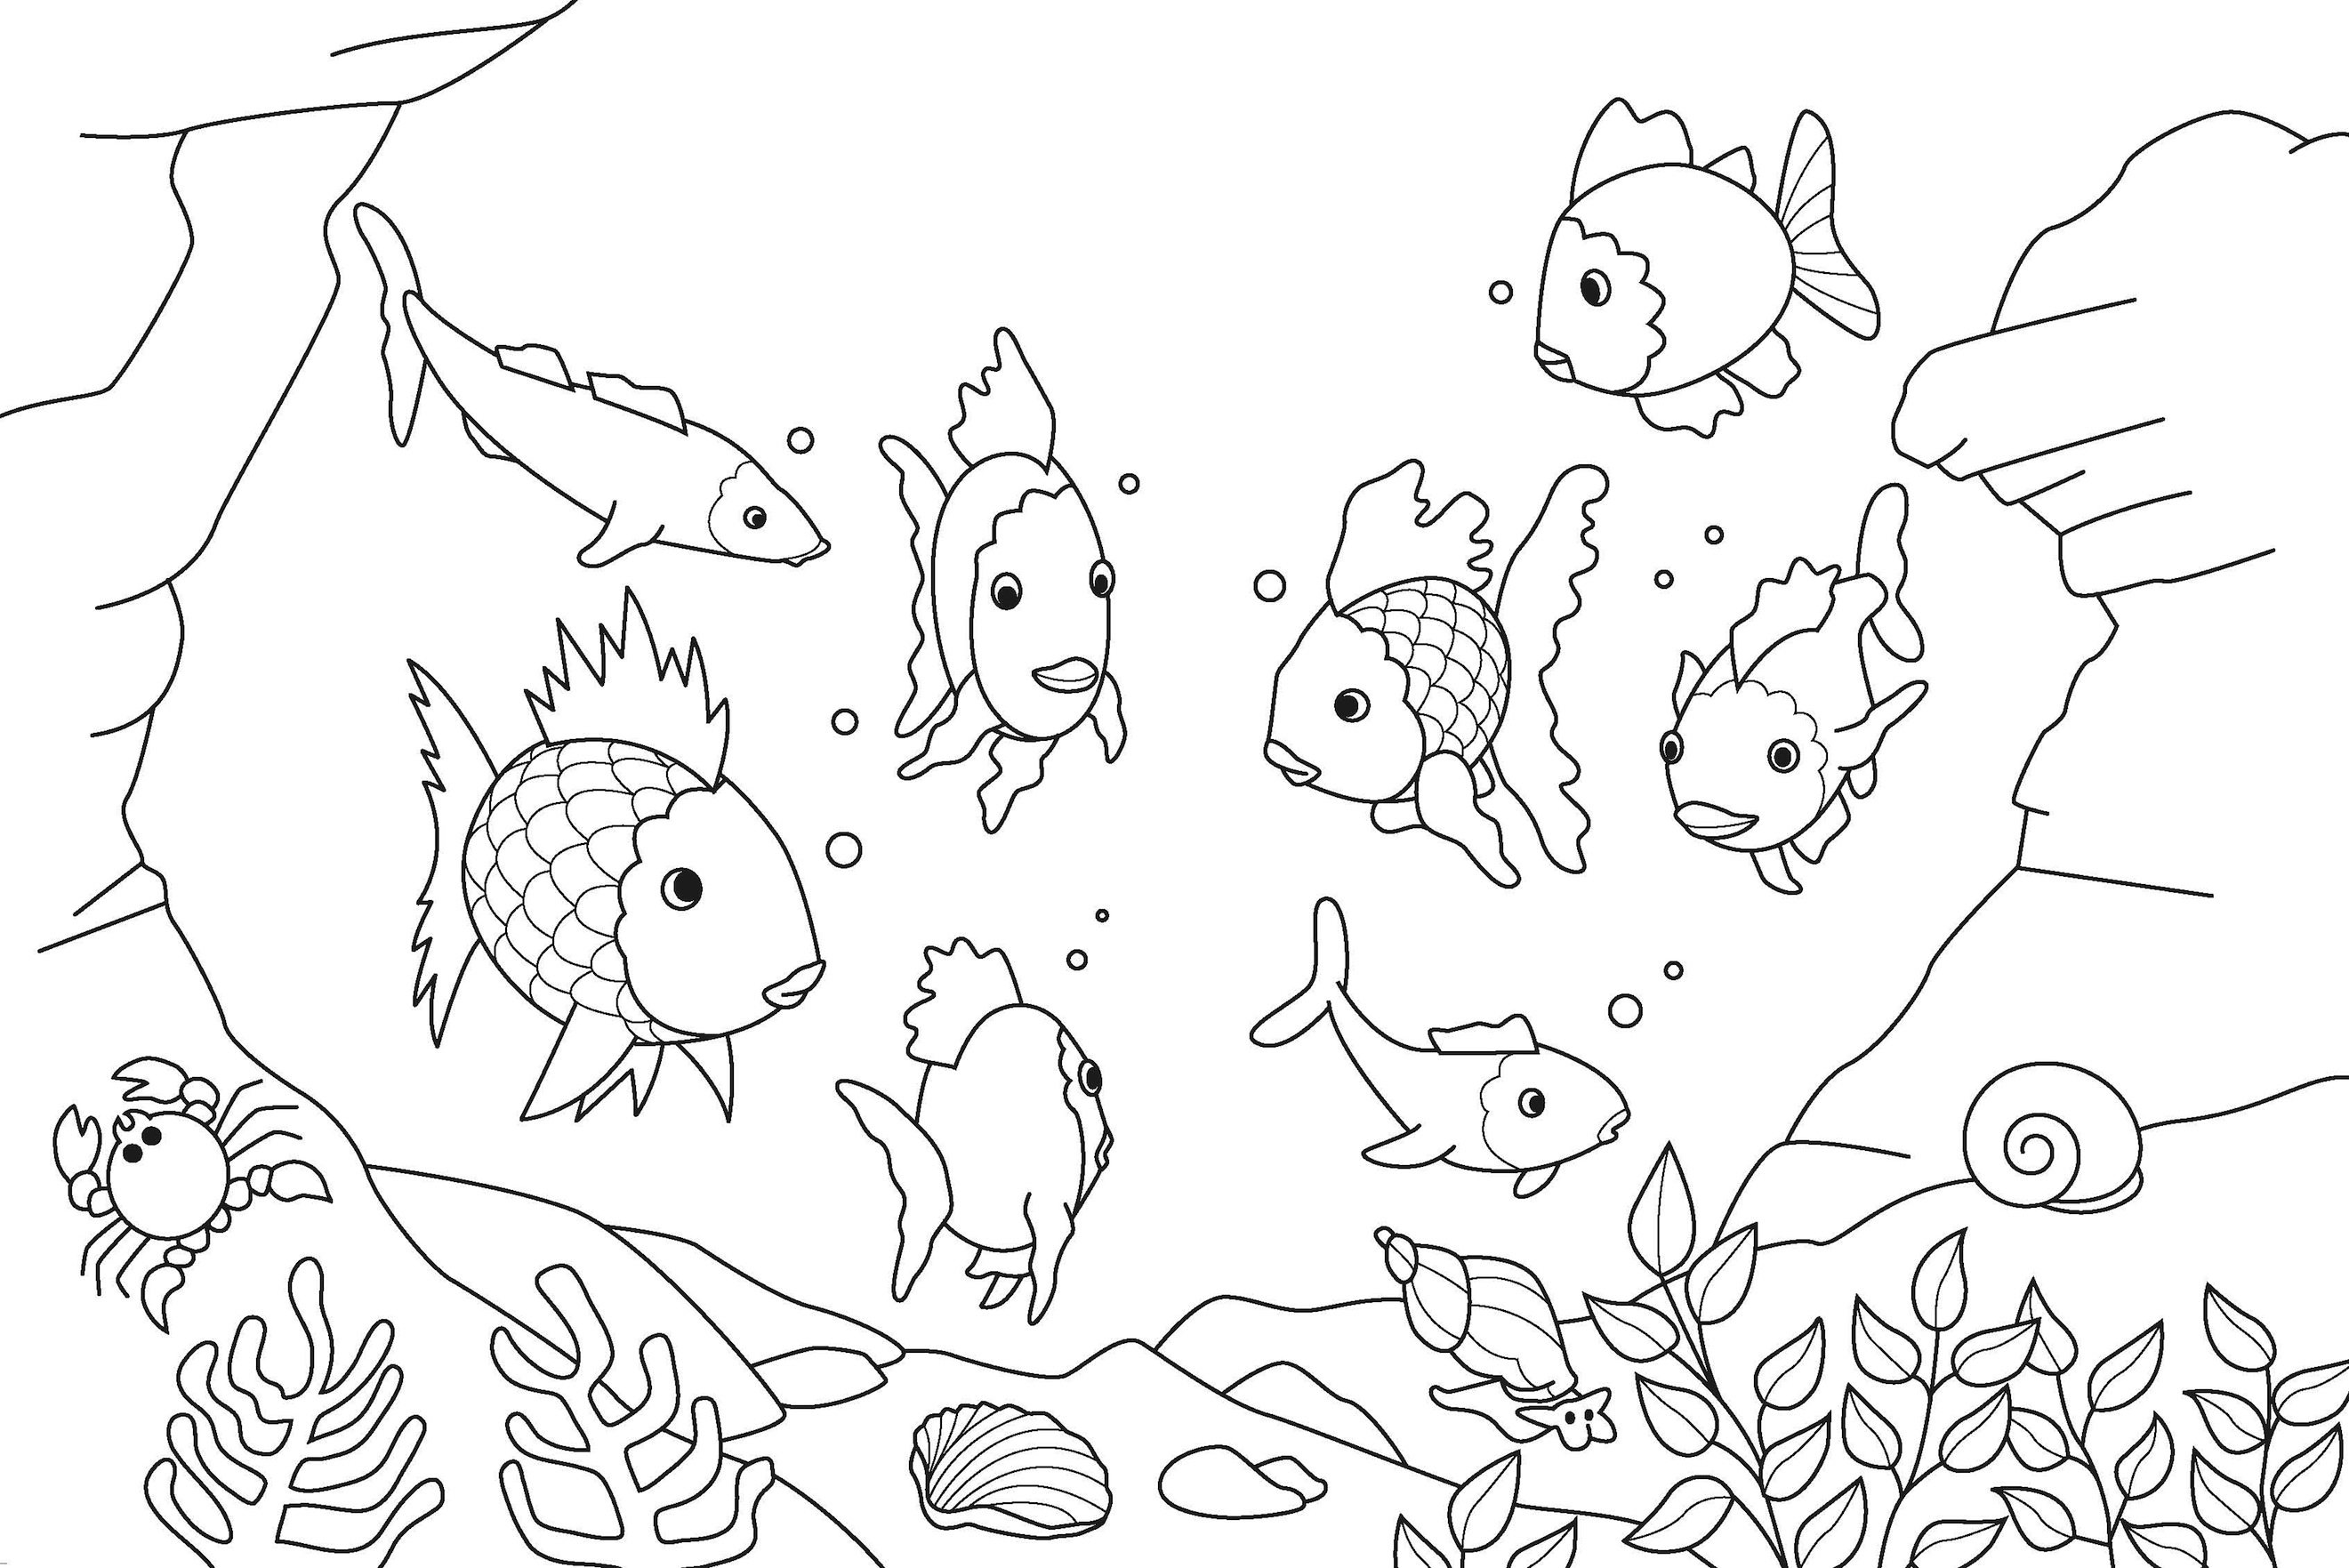 Rainbow Fish Coloring Pages for Kids